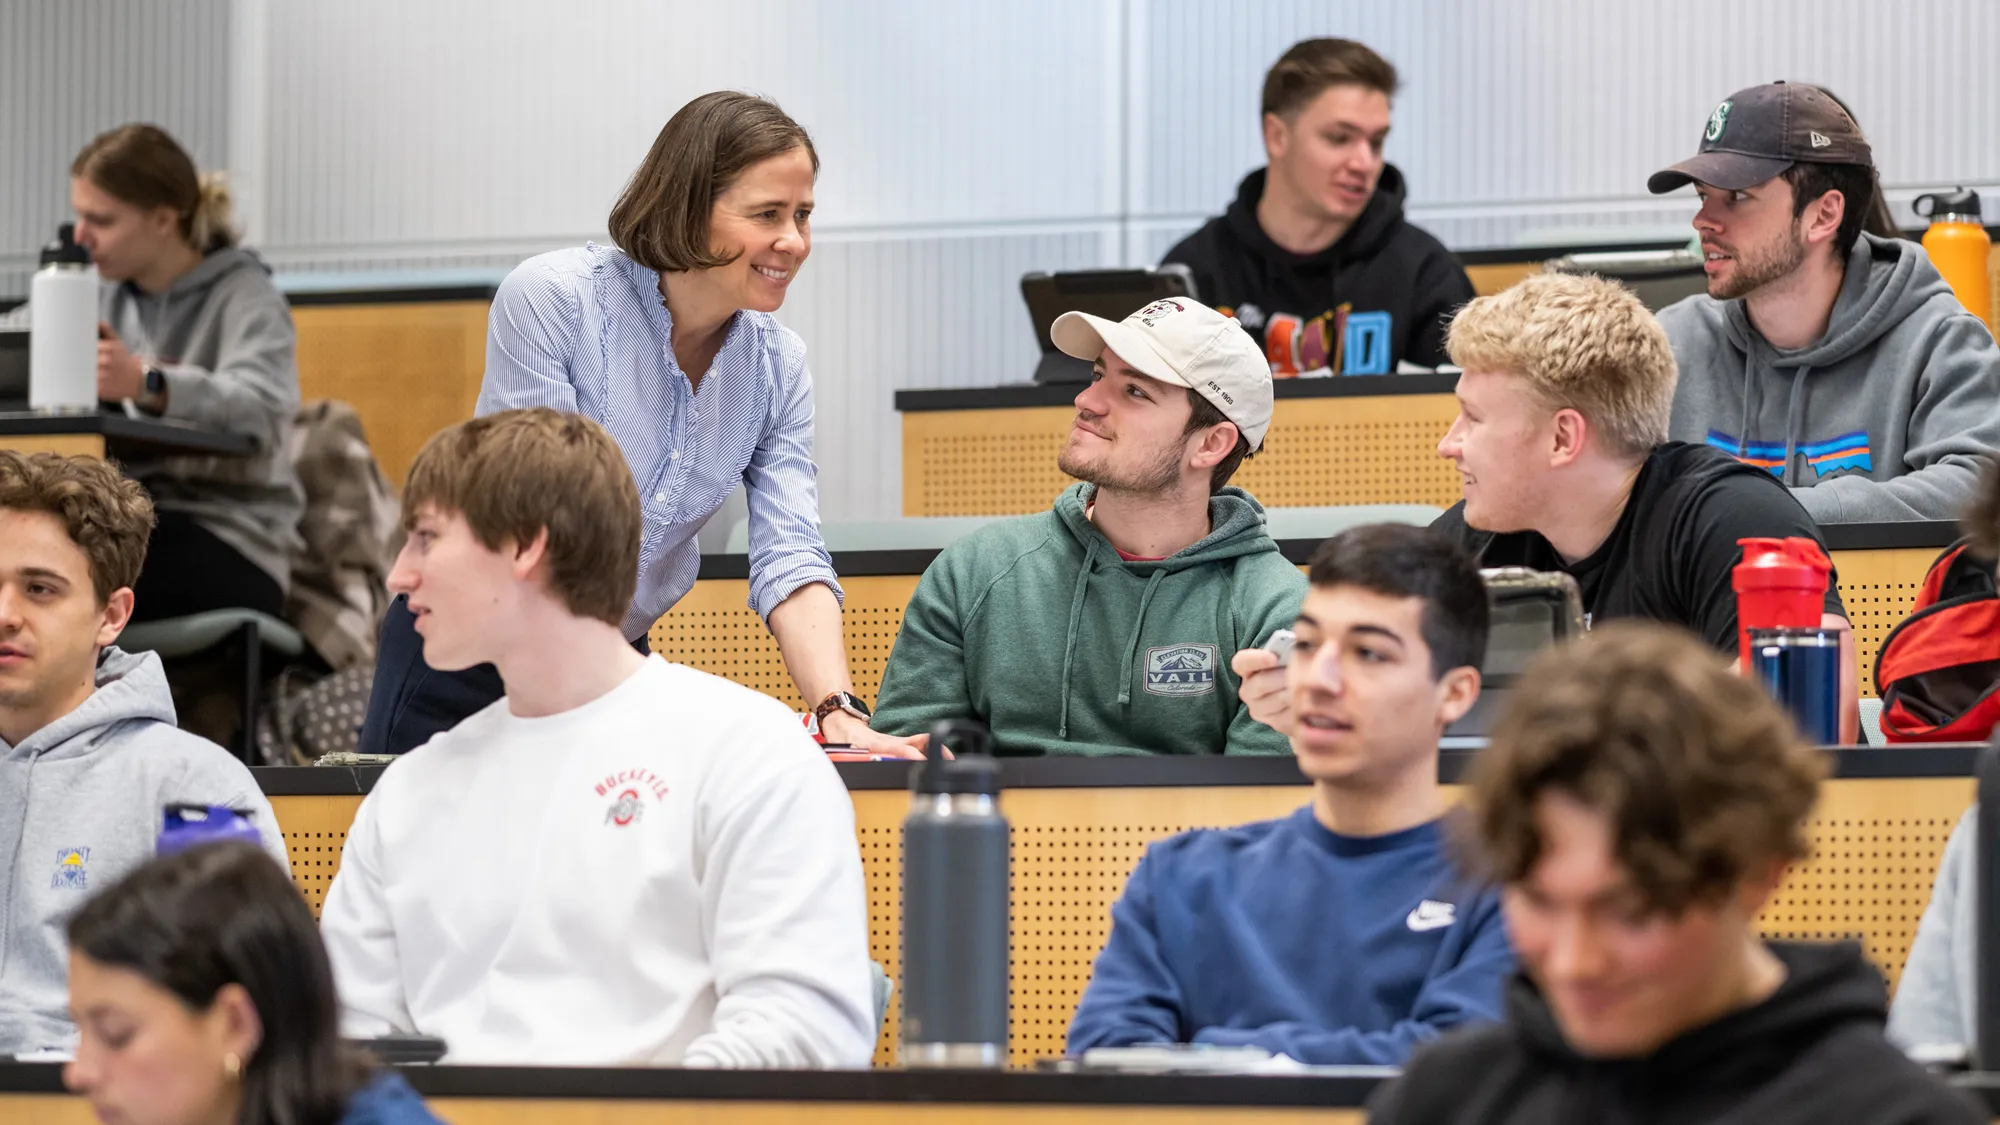 In a classroom with mostly male students, teacher Carmen Swain leans on a desk to talk to two students. She and the young men seem relaxed and are smiling.